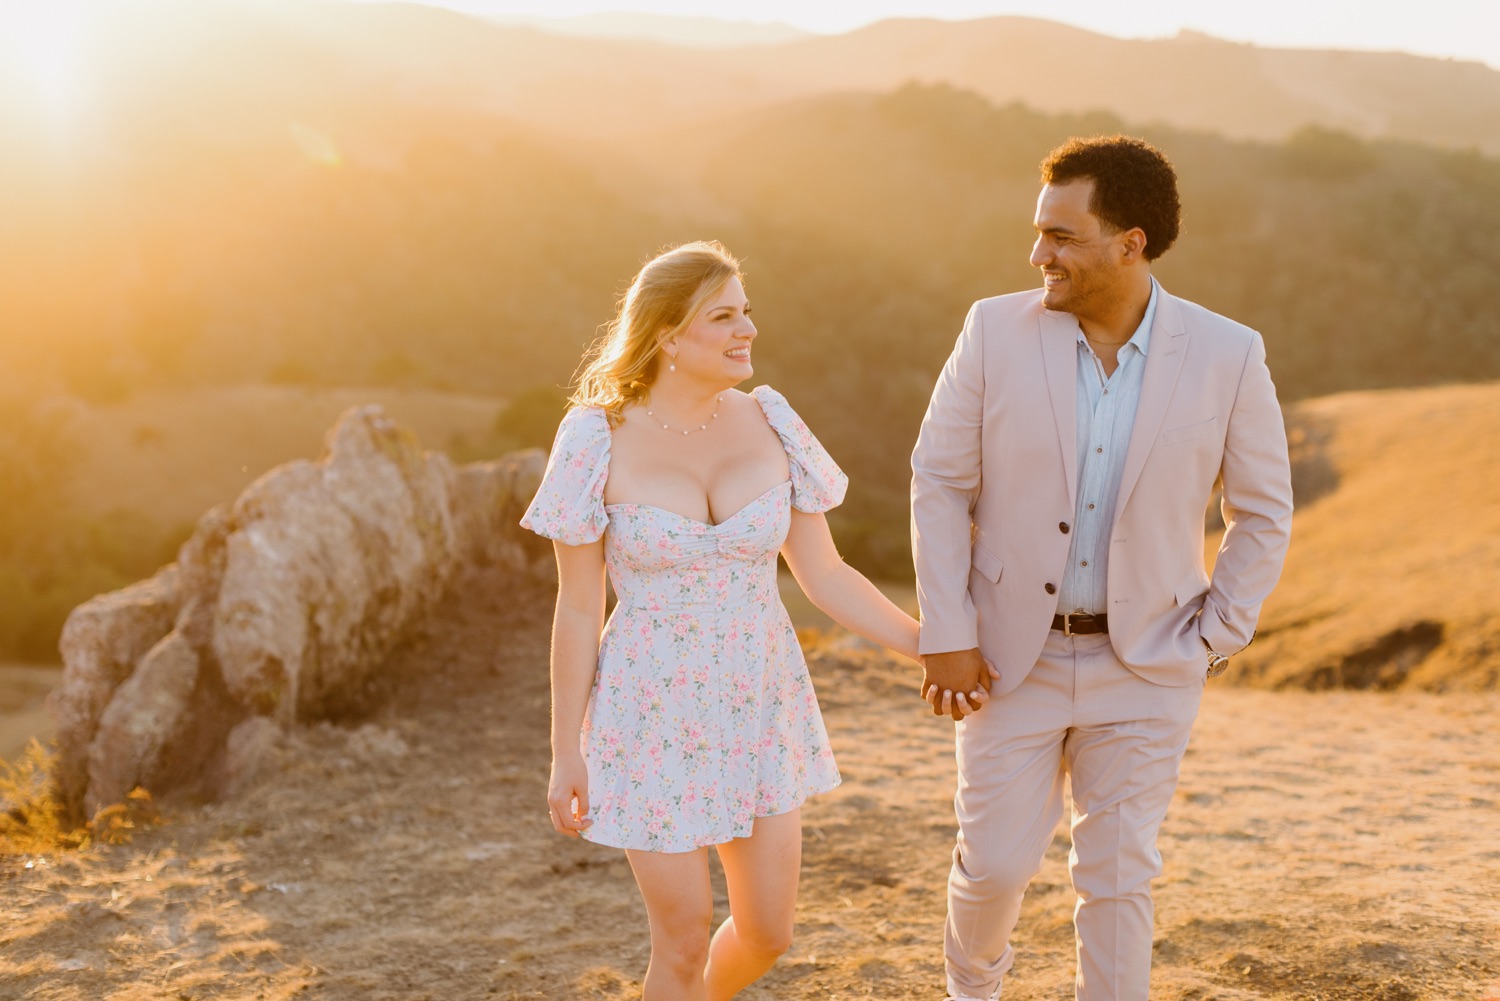 couple walking and smiling at eachother during sunset photos at Perfumo canyon, san Luis Obispo